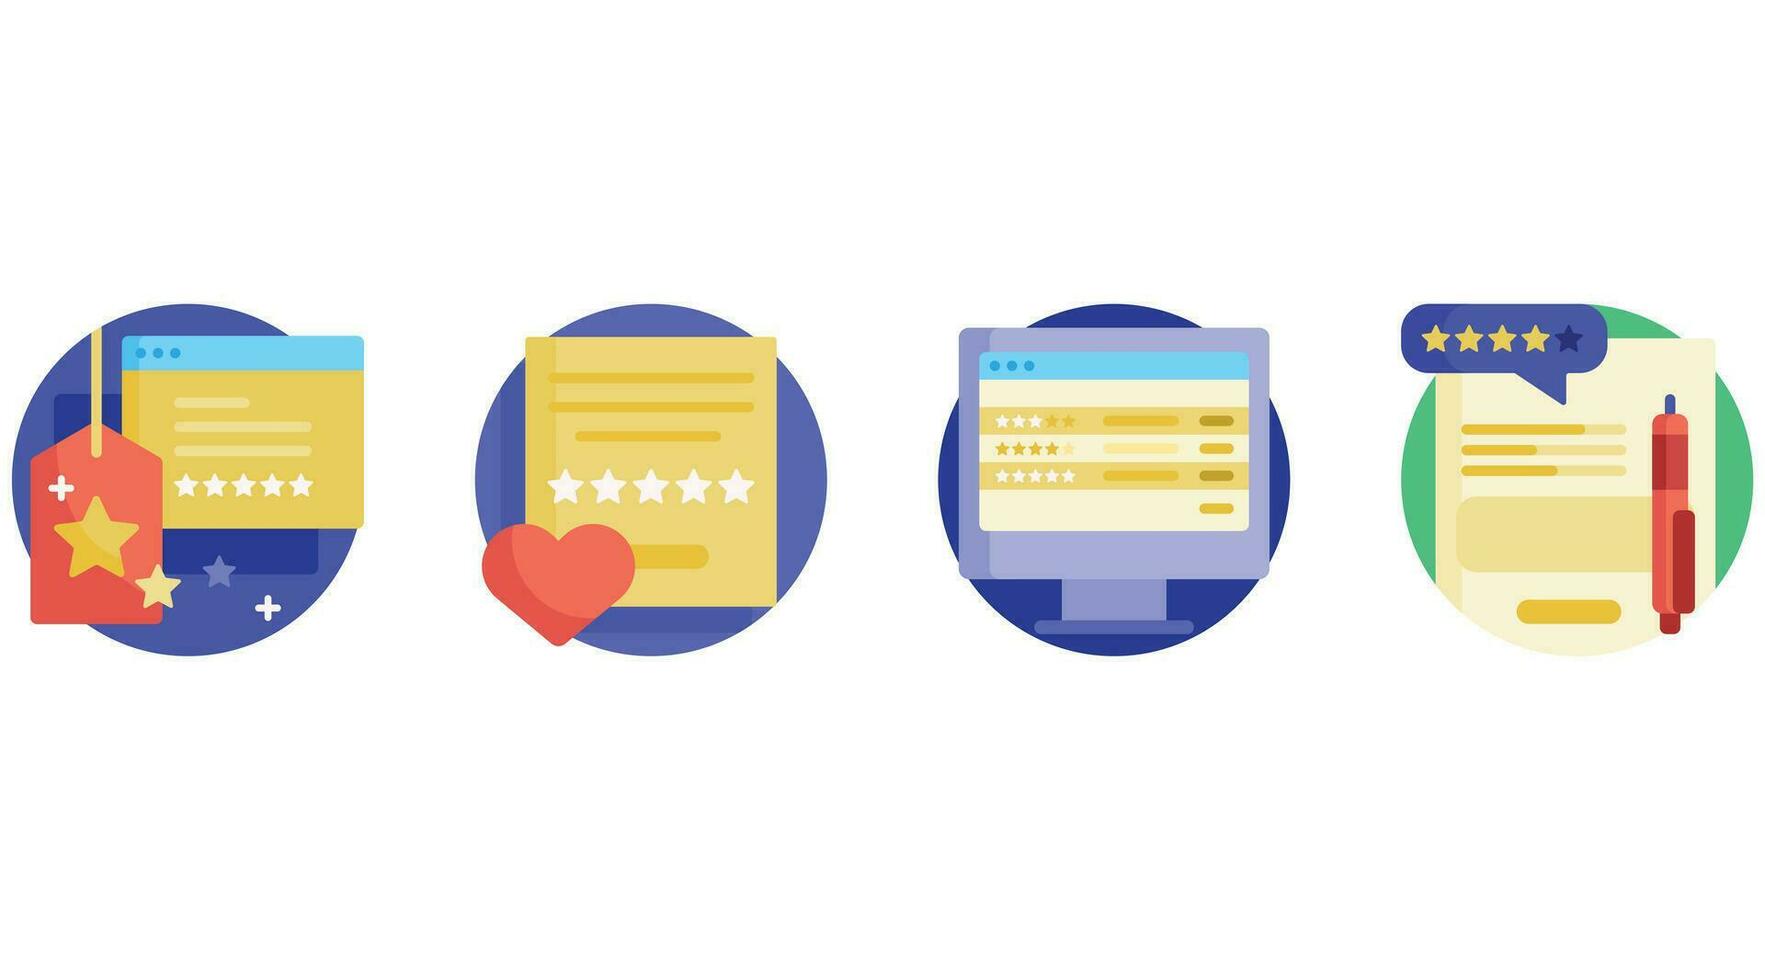 Customer feedback and review on products and services vector icon set